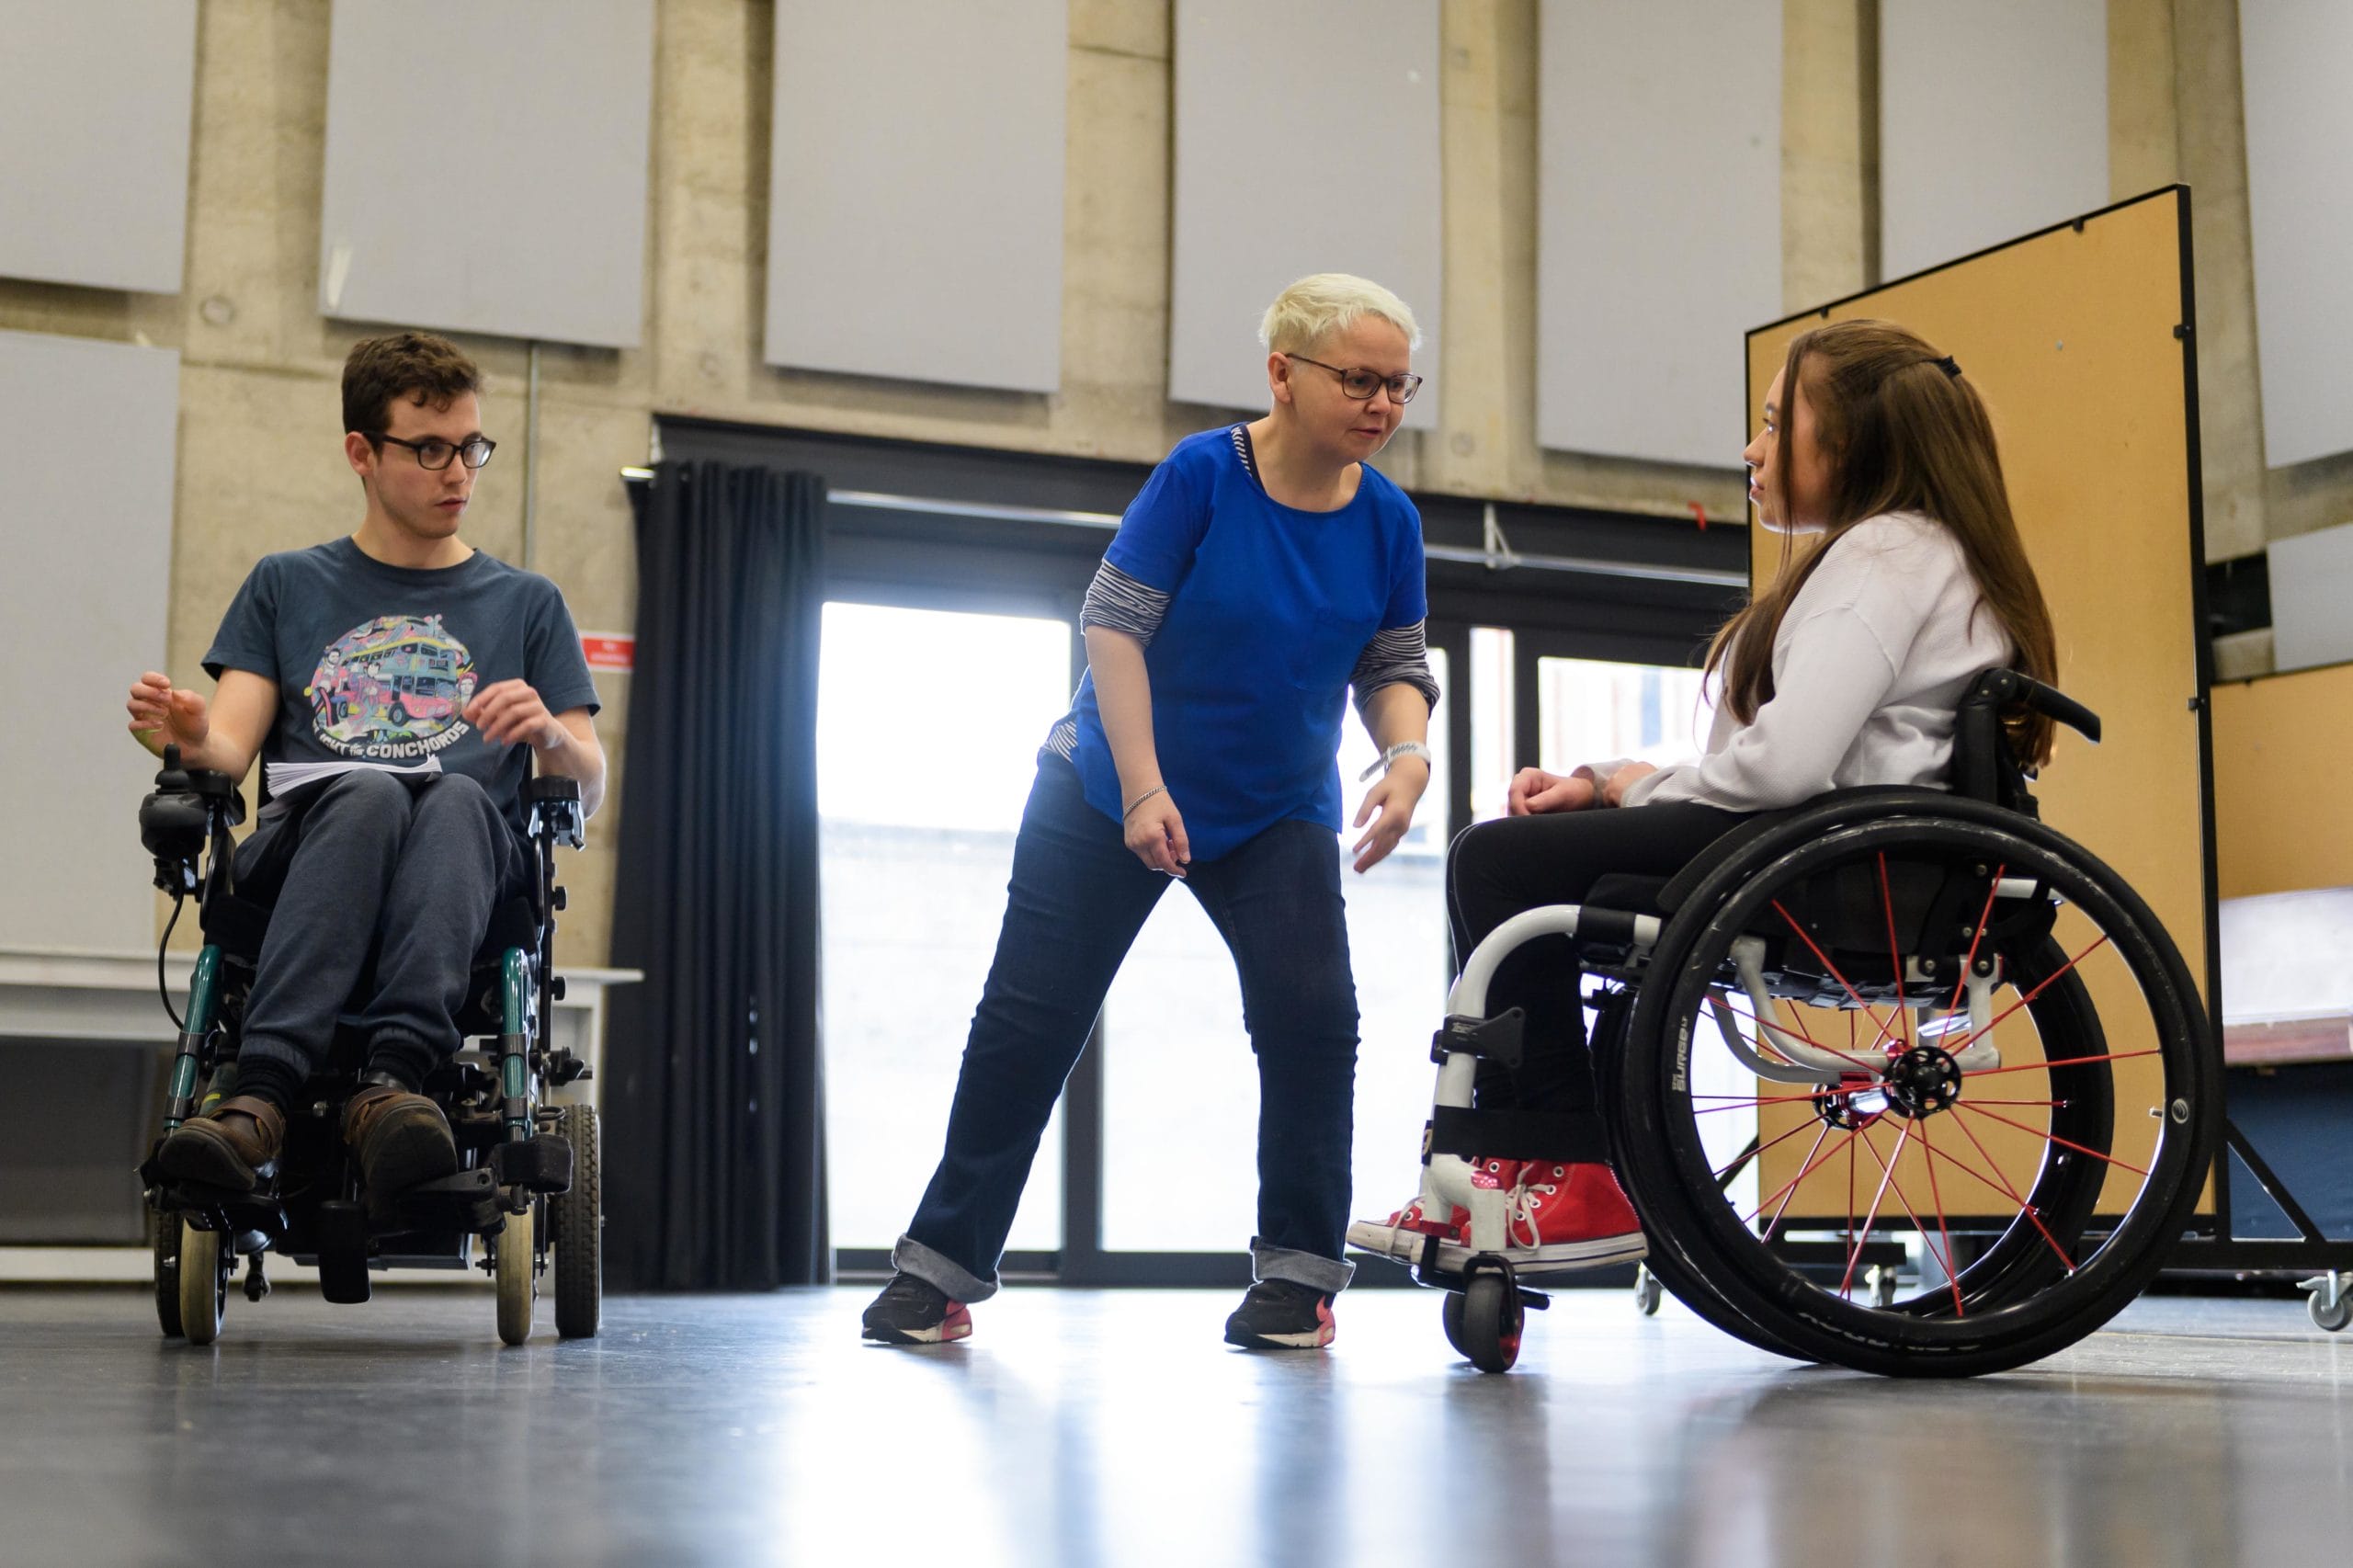 Rehearsals for Kerbs, Maya Coates and Jack Hunter face each other whilst a woman in between them watches.